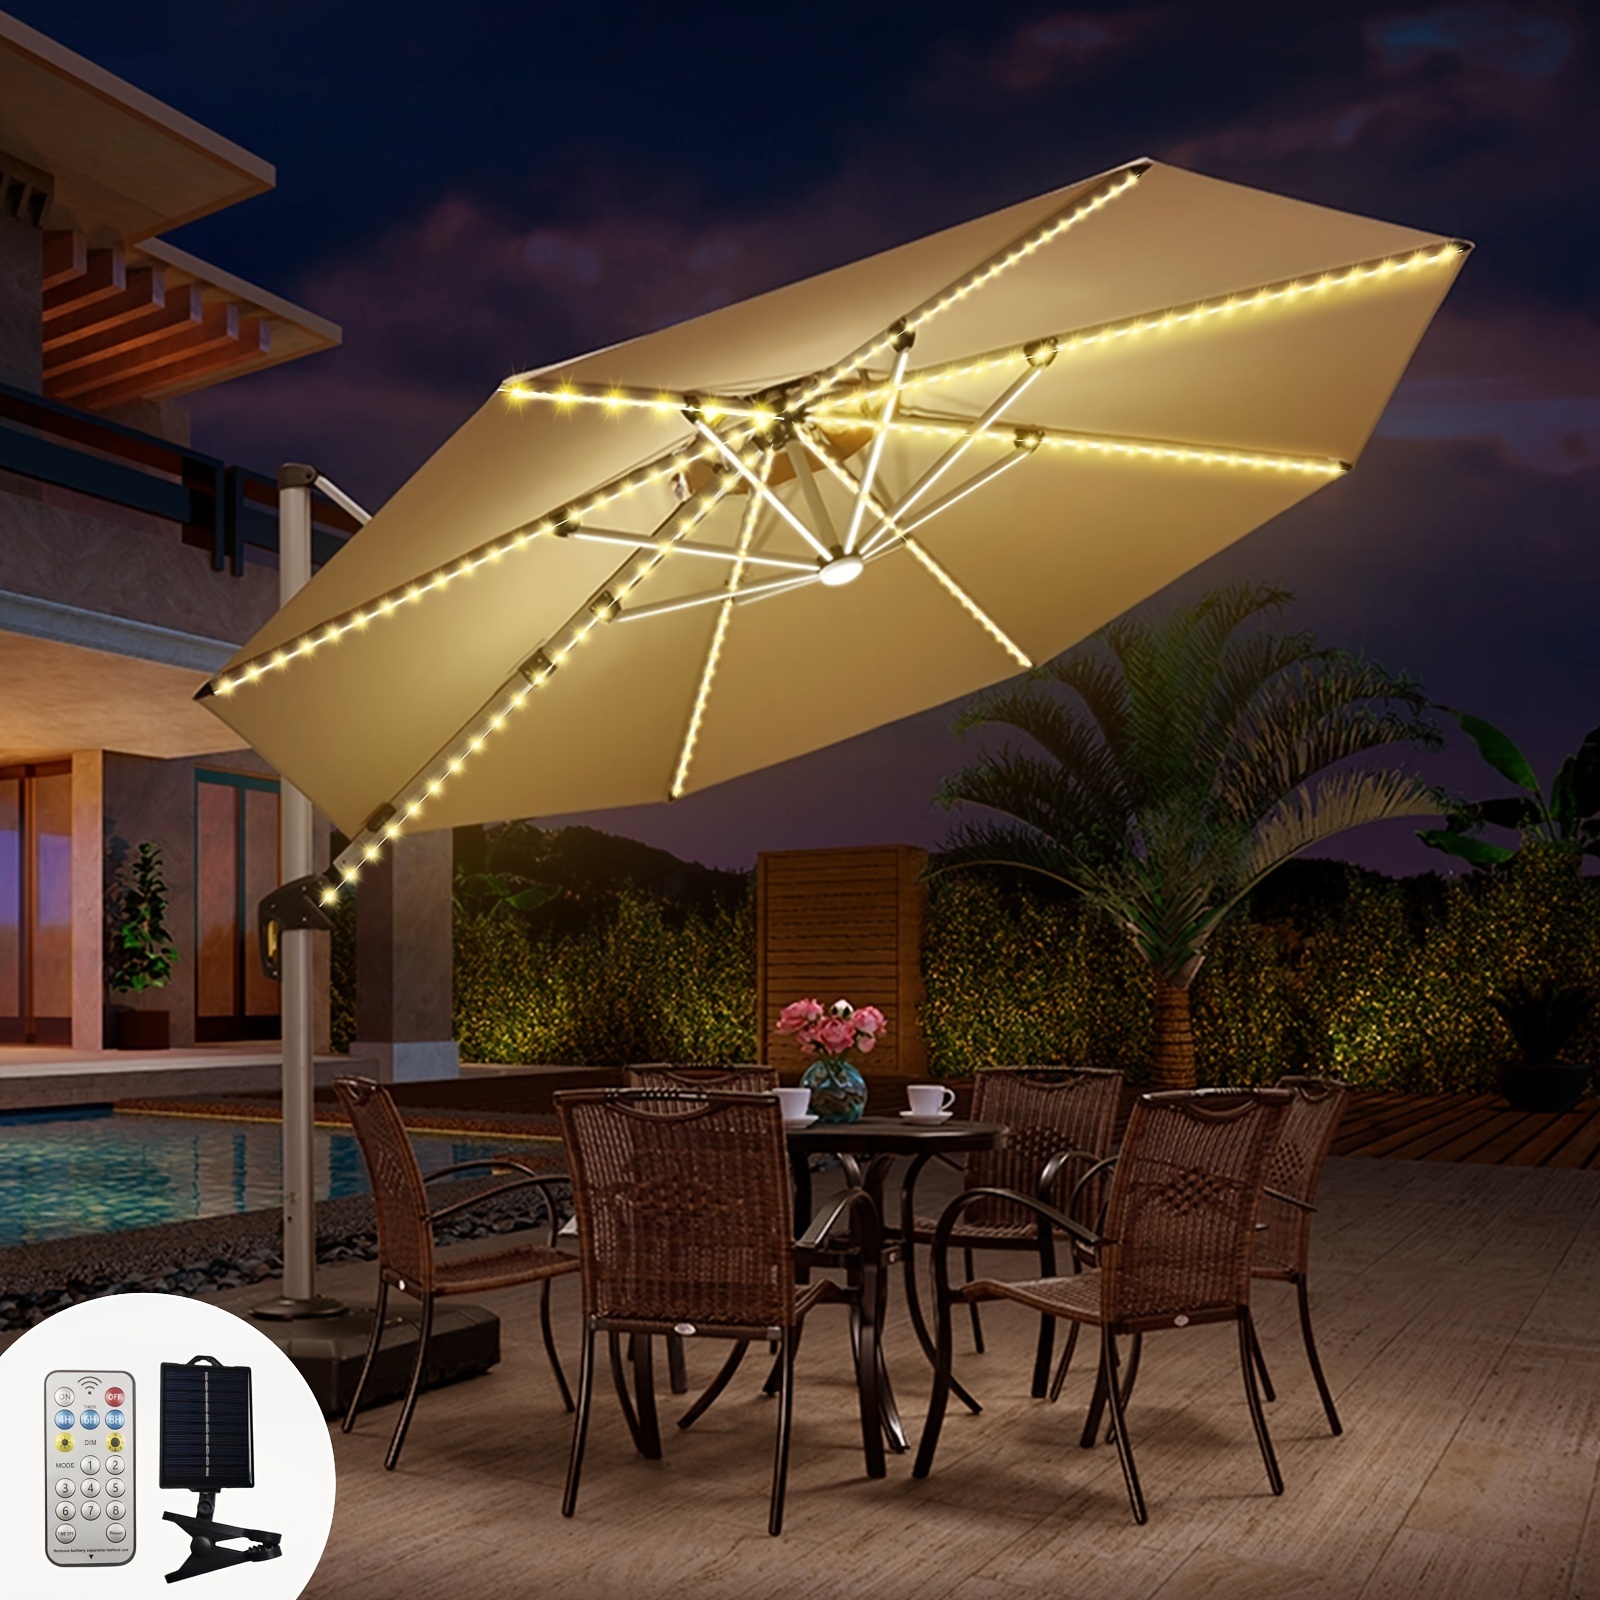 

Solar-powered Clip-on Umbrella Light With Remote - 104 Led Patio & Camping Lamp, 8 Modes, Perfect For Outdoor Garden, Yard, And Backyard Decor Solar Outdoor Lights Outdoor Solar Lights